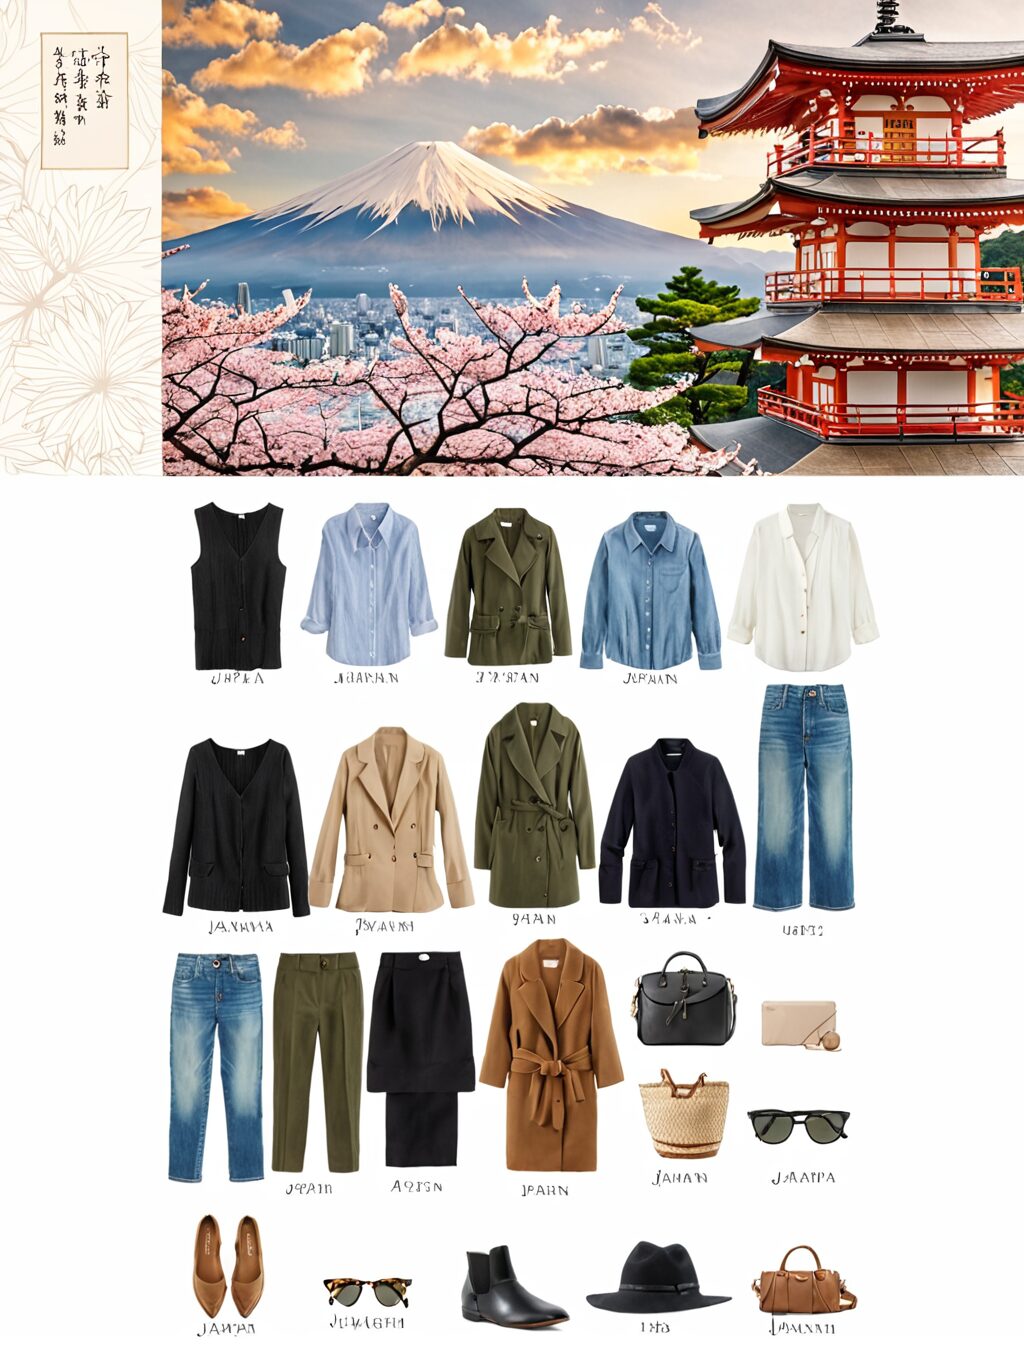 japan travel outfit ideas